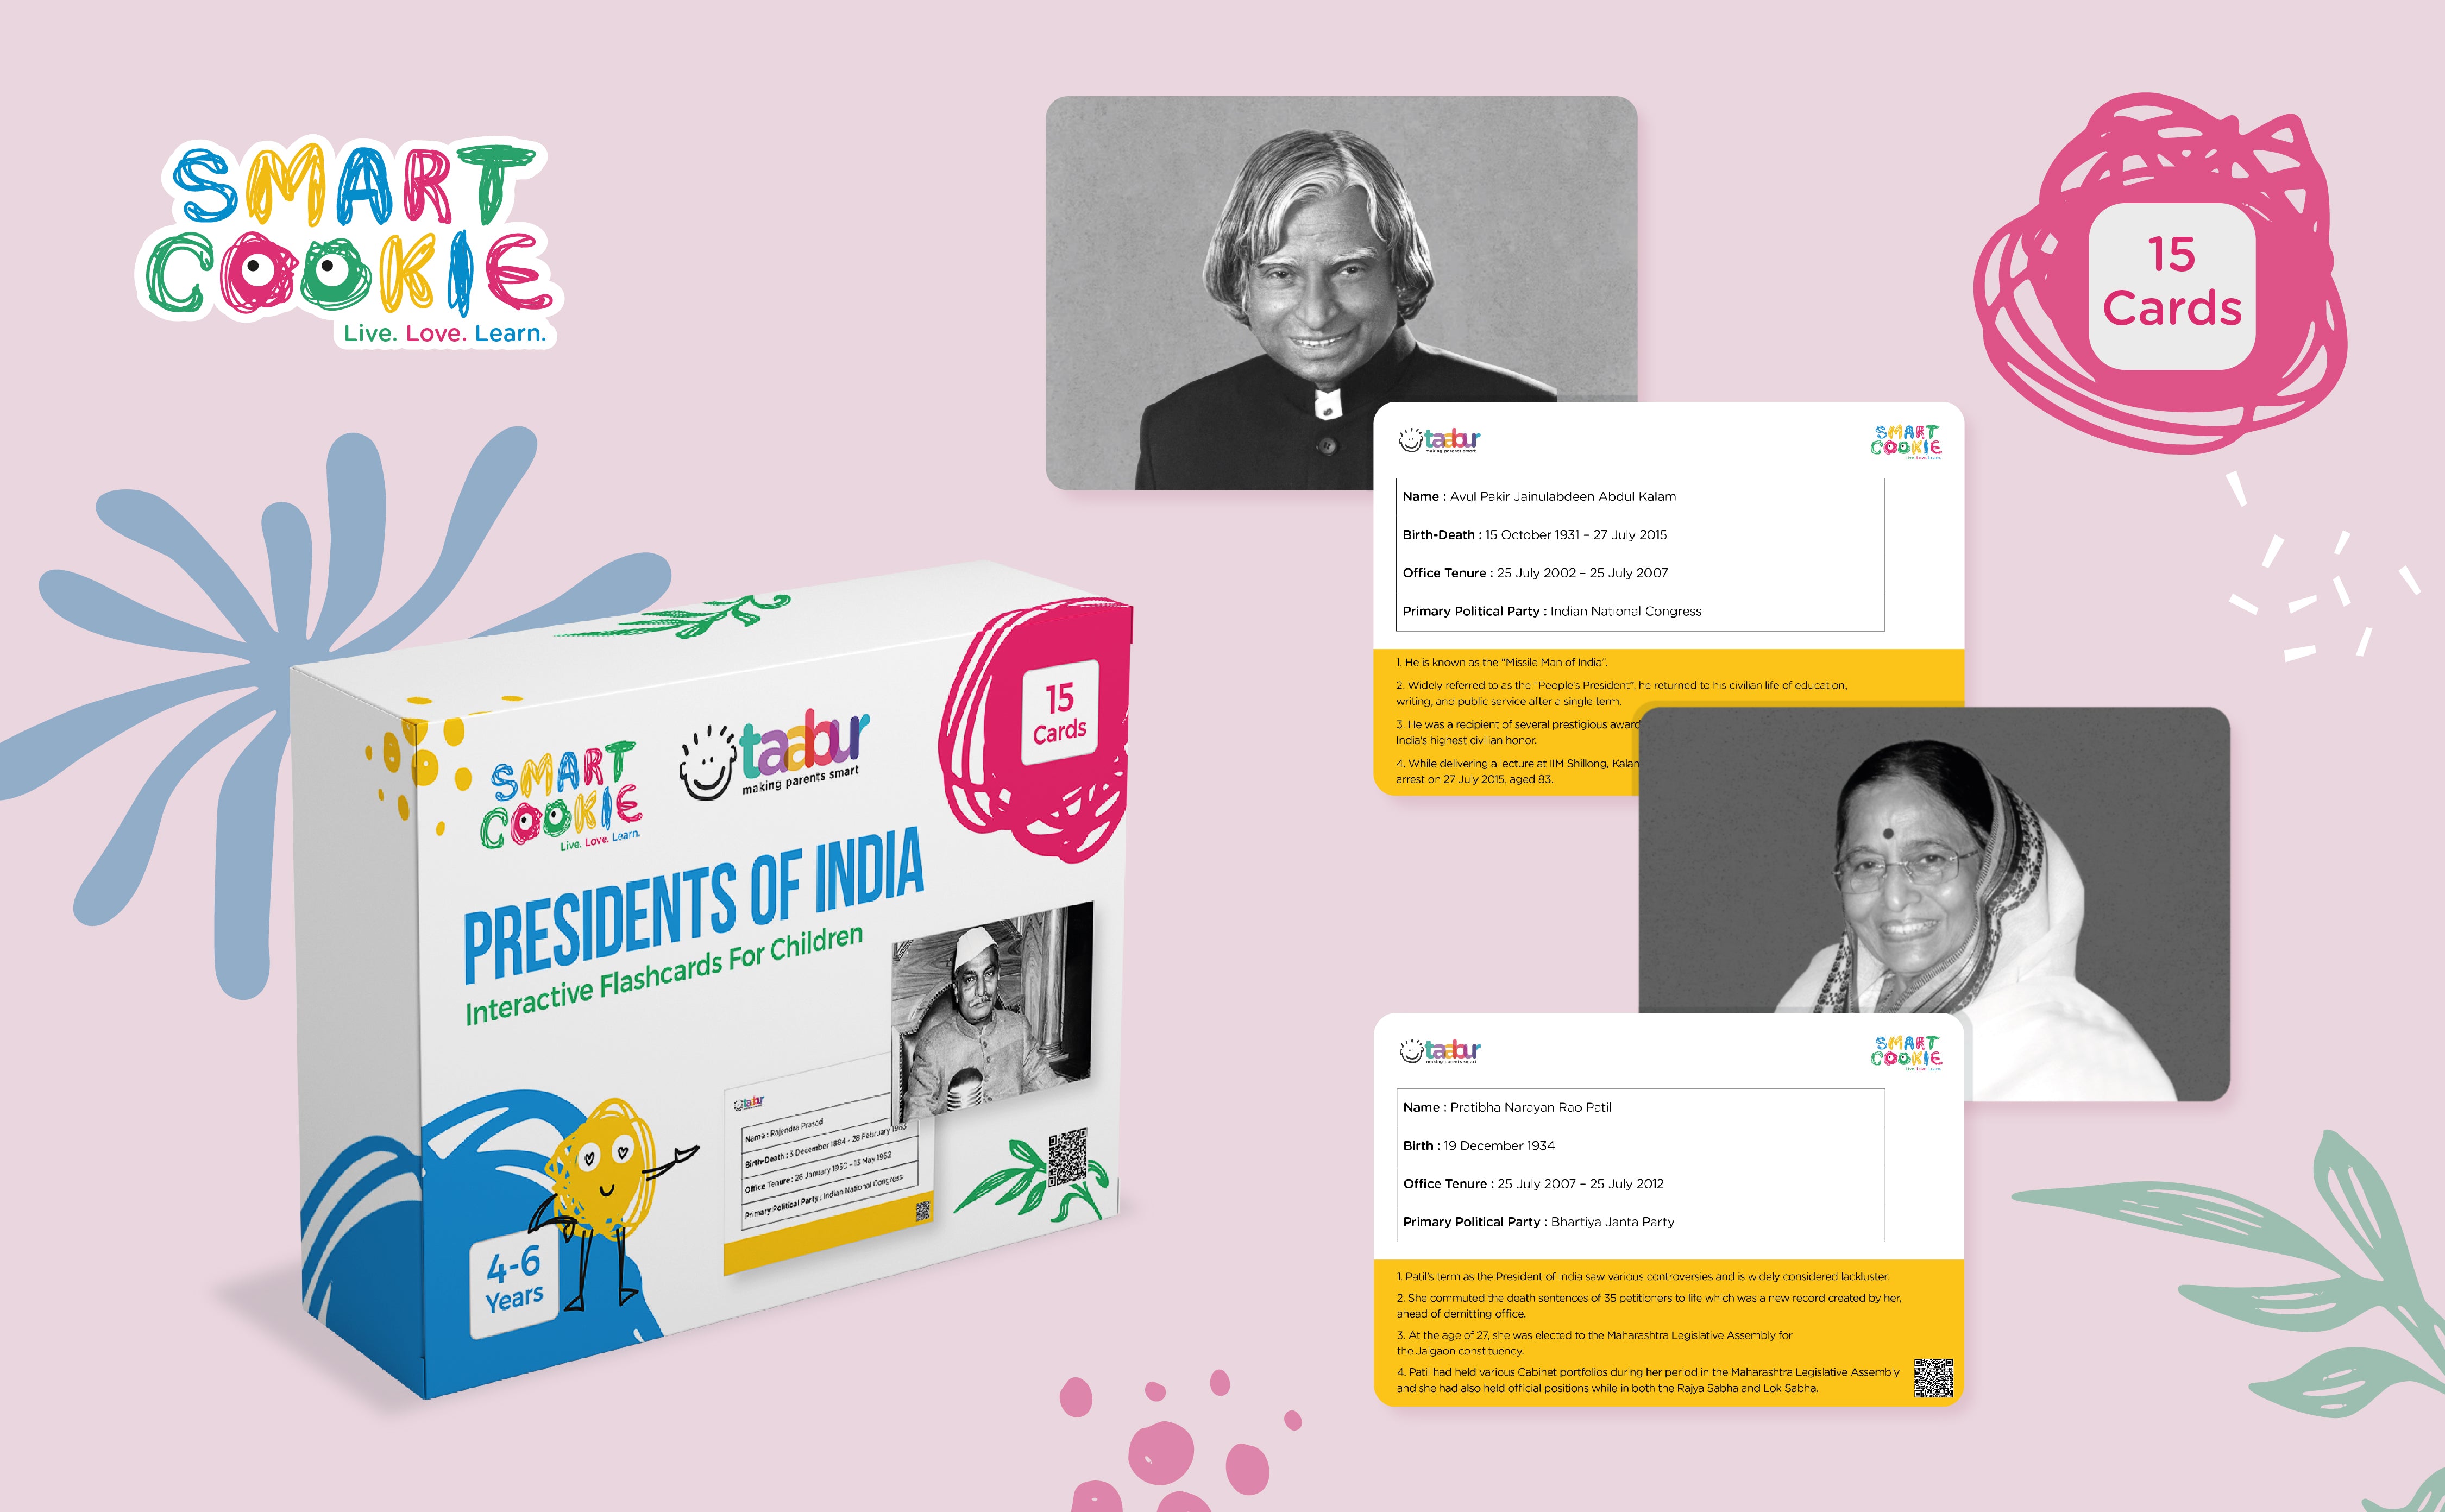 Presidents of India - Interactive Flashcards for Children (15 Cards) - for Kids Aged 2 to 4 Years Old